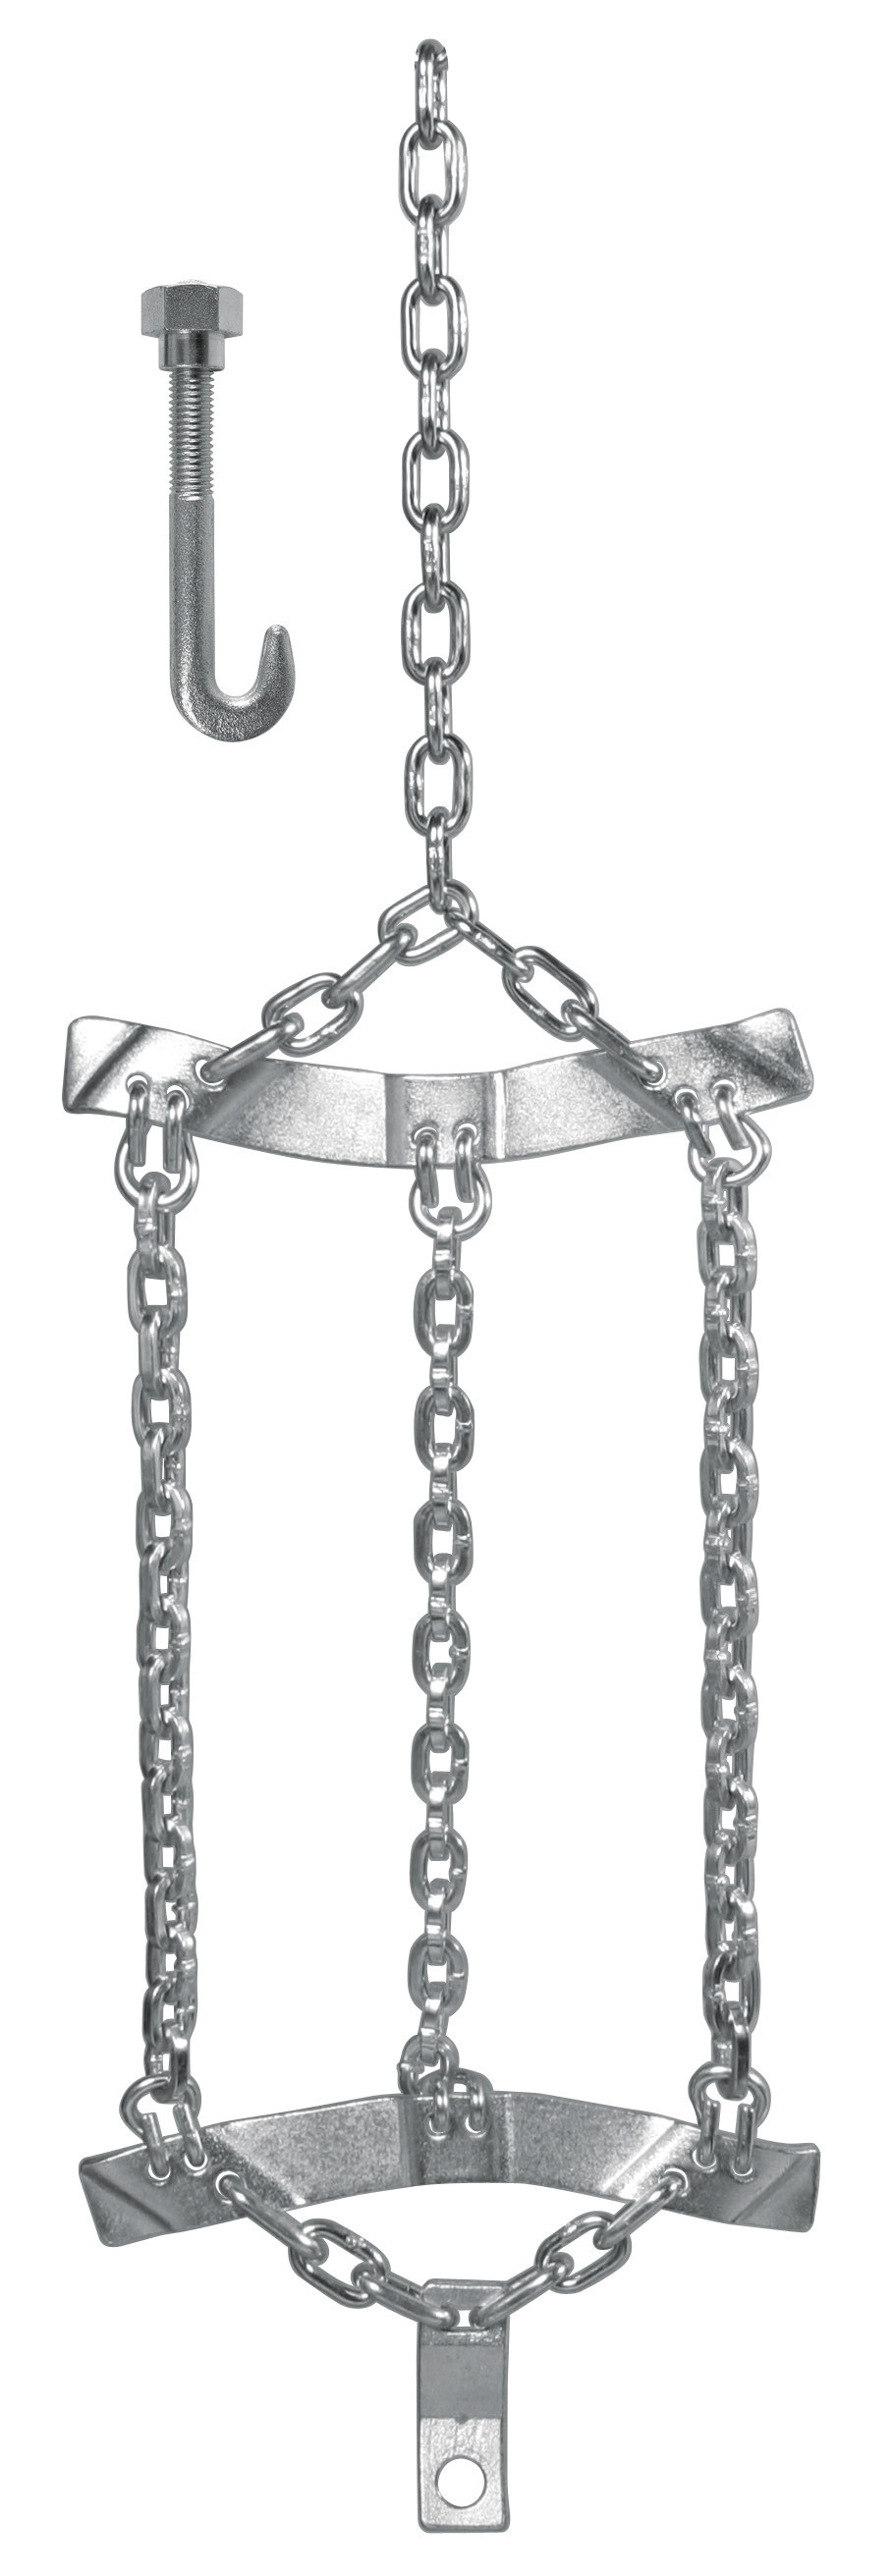 Track sector chains for trucks - L-3 thumb